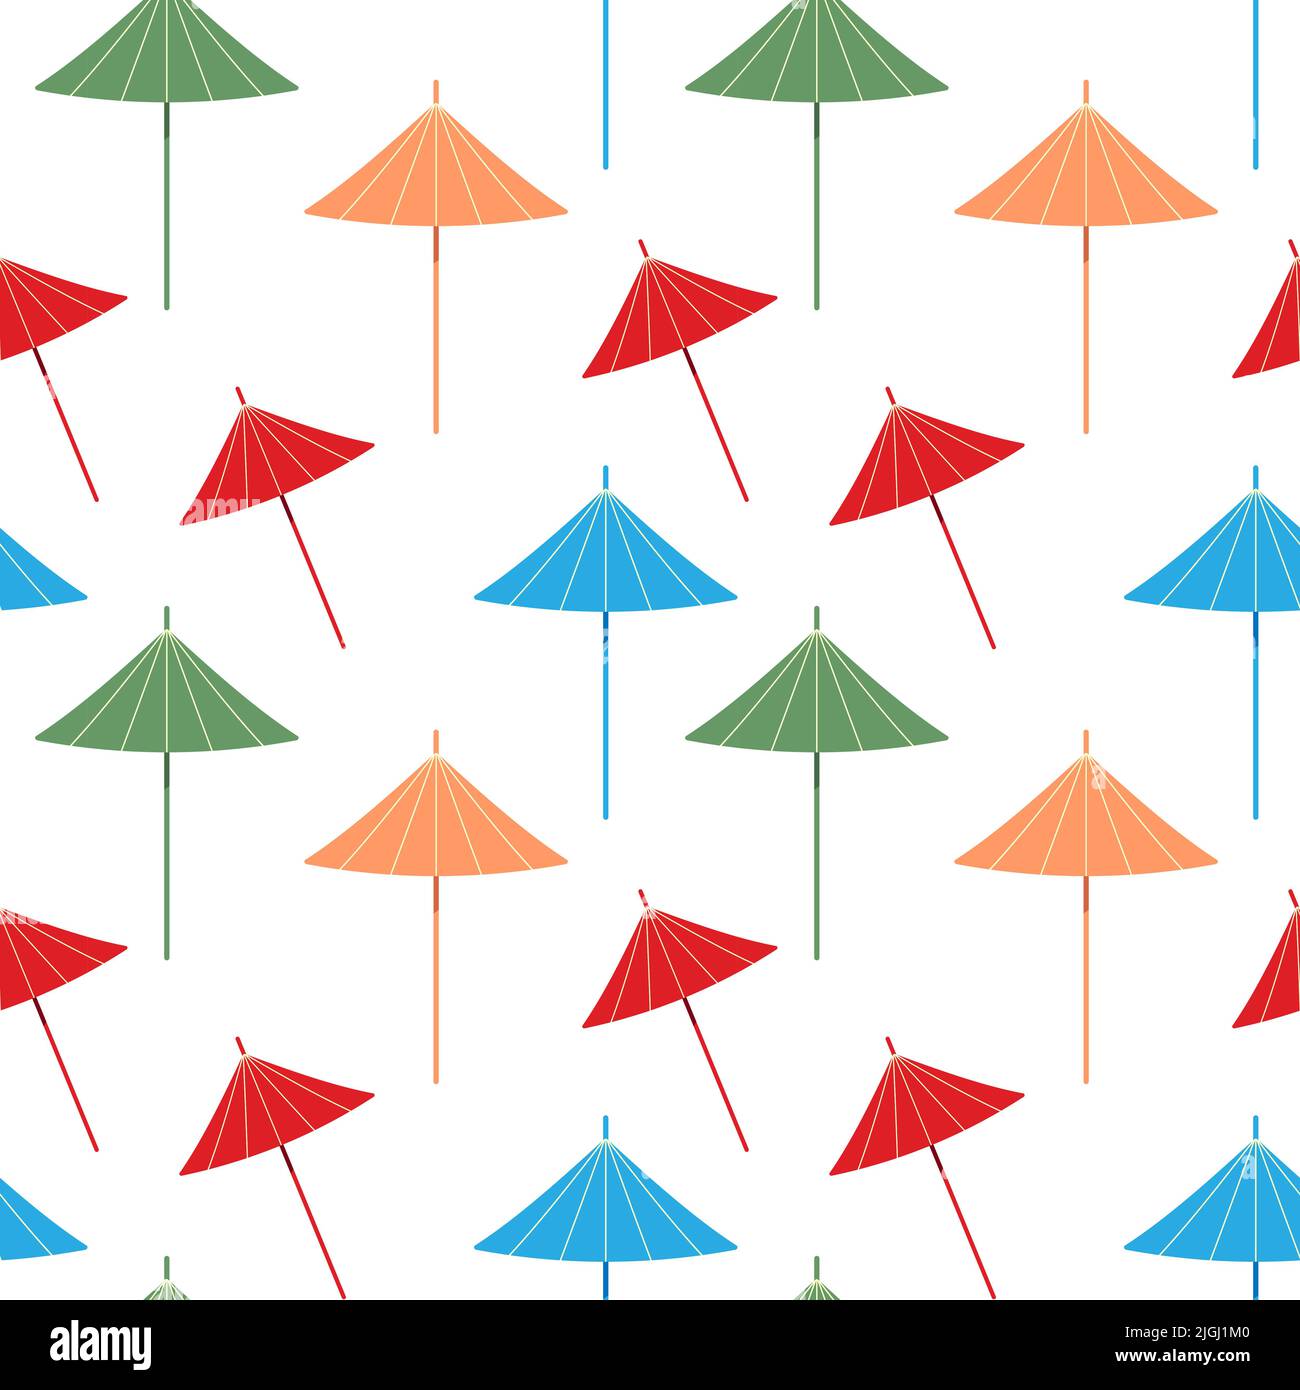 Bright summer pattern with an abstract image of colorful cocktail umbrellas in trendy hues on a white background. Suitable for print, flyer, pattern. Stock Vector